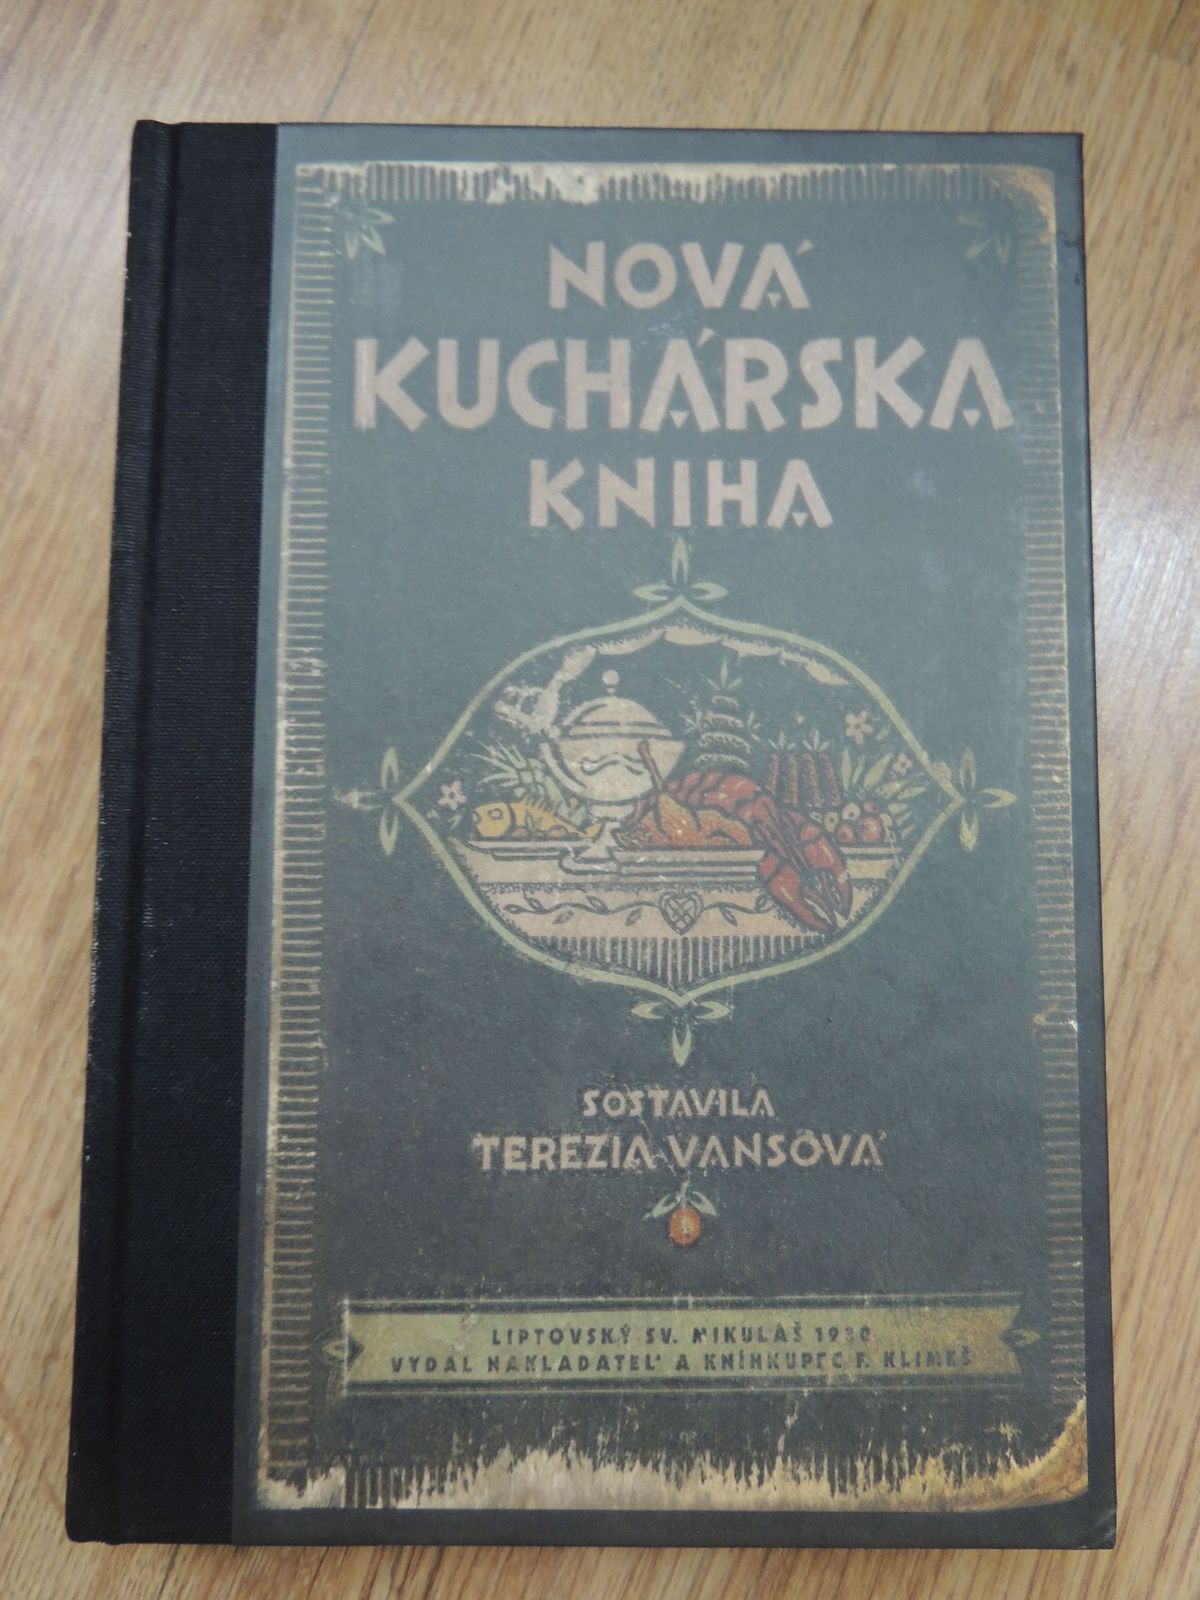 Old Cookbook: Dishes from Fieldfare Popular in Slovakia 100 Years Ago